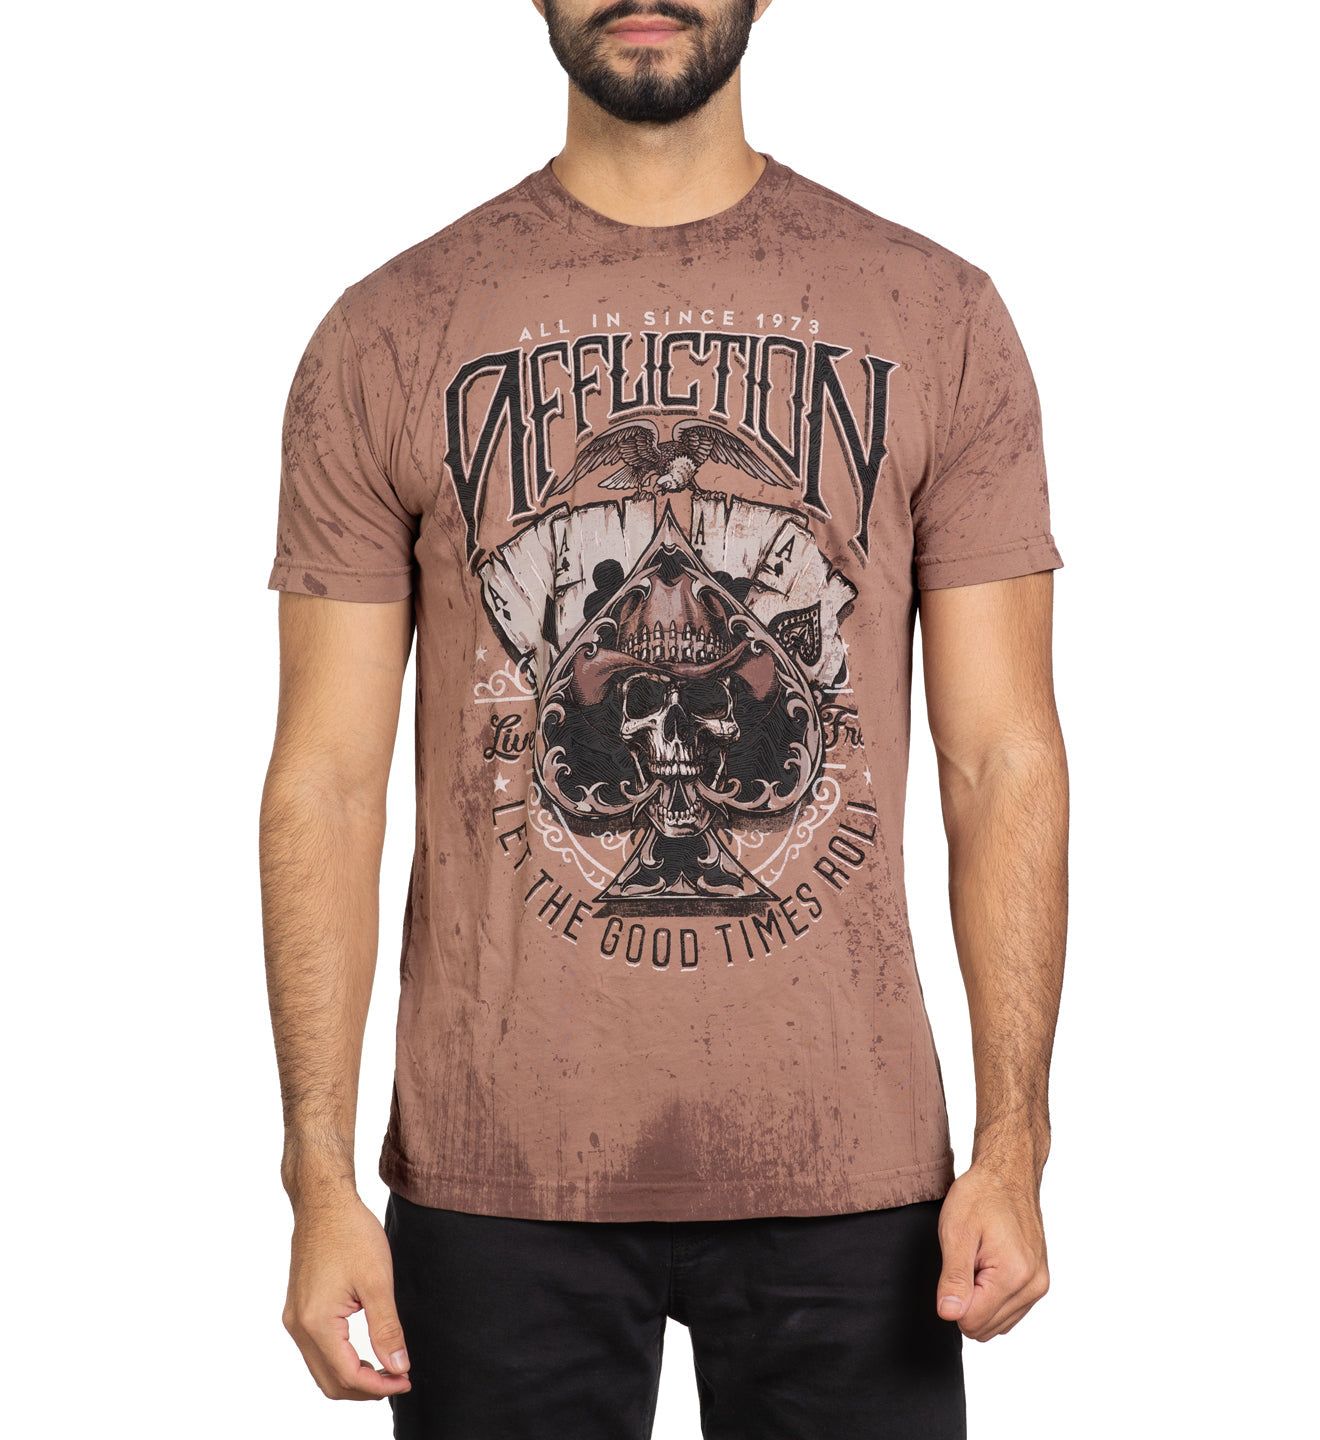 All In - Affliction Clothing